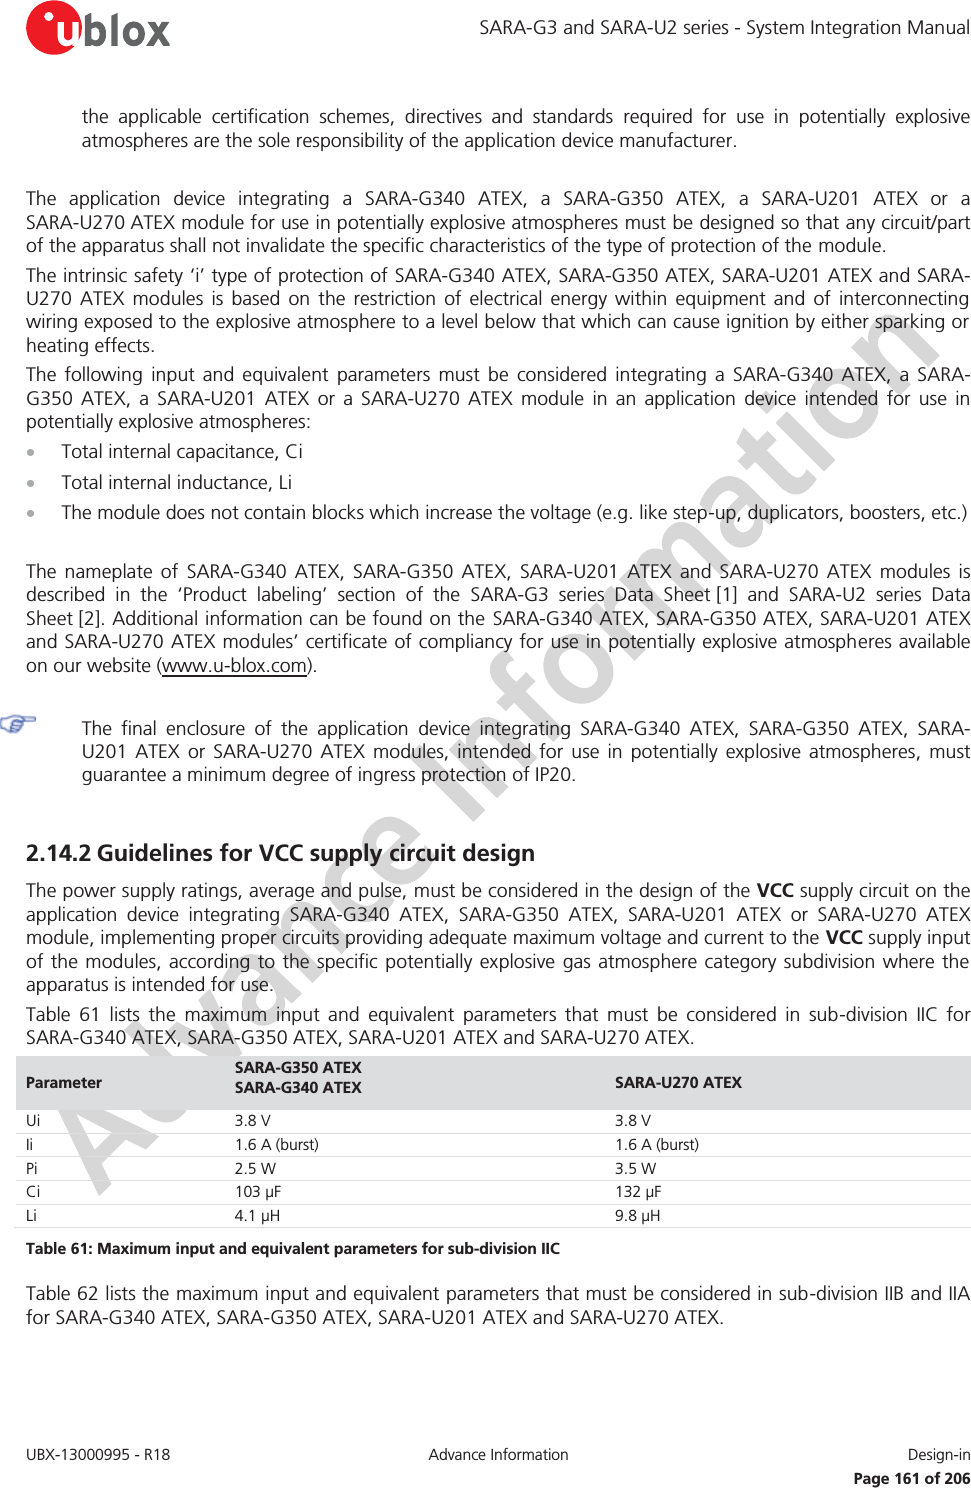 SARA-G3 and SARA-U2 series - System Integration Manual UBX-13000995 - R18  Advance Information  Design-in   Page 161 of 206 the applicable certification schemes, directives and standards required for use in potentially explosive atmospheres are the sole responsibility of the application device manufacturer.  The application device integrating a SARA-G340 ATEX, a SARA-G350 ATEX, a SARA-U201 ATEX or a SARA-U270 ATEX module for use in potentially explosive atmospheres must be designed so that any circuit/part of the apparatus shall not invalidate the specific characteristics of the type of protection of the module. The intrinsic safety ‘i’ type of protection of SARA-G340 ATEX, SARA-G350 ATEX, SARA-U201 ATEX and SARA-U270 ATEX modules is based on the restriction of electrical energy within equipment and of interconnecting wiring exposed to the explosive atmosphere to a level below that which can cause ignition by either sparking or heating effects. The following input and equivalent parameters must be considered integrating a SARA-G340 ATEX, a SARA-G350 ATEX, a SARA-U201 ATEX or a SARA-U270 ATEX module in an application device intended for use in potentially explosive atmospheres: x Total internal capacitance, Ci  x Total internal inductance, Li  x The module does not contain blocks which increase the voltage (e.g. like step-up, duplicators, boosters, etc.)  The nameplate of SARA-G340 ATEX, SARA-G350 ATEX, SARA-U201 ATEX and SARA-U270 ATEX modules is described in the ‘Product labeling’ section of the SARA-G3 series Data Sheet [1]  and  SARA-U2 series Data Sheet [2]. Additional information can be found on the SARA-G340 ATEX, SARA-G350 ATEX, SARA-U201 ATEX and SARA-U270 ATEX modules’ certificate of compliancy for use in potentially explosive atmospheres available on our website (www.u-blox.com).   The final enclosure of the application device integrating SARA-G340 ATEX, SARA-G350 ATEX, SARA-U201 ATEX or SARA-U270 ATEX modules, intended for use in potentially explosive atmospheres, must guarantee a minimum degree of ingress protection of IP20.  2.14.2 Guidelines for VCC supply circuit design The power supply ratings, average and pulse, must be considered in the design of the VCC supply circuit on the application device integrating SARA-G340 ATEX, SARA-G350 ATEX, SARA-U201 ATEX or SARA-U270 ATEX module, implementing proper circuits providing adequate maximum voltage and current to the VCC supply input of the modules, according to the specific potentially explosive gas atmosphere category subdivision where the apparatus is intended for use. Table 61 lists the maximum input and equivalent parameters that must be considered in sub-division IIC for SARA-G340 ATEX, SARA-G350 ATEX, SARA-U201 ATEX and SARA-U270 ATEX. Parameter SARA-G350 ATEX  SARA-G340 ATEX  SARA-U270 ATEX Ui 3.8 V 3.8 V Ii 1.6 A (burst) 1.6 A (burst) Pi 2.5 W 3.5 W Ci 103 μF 132 μF Li 4.1 μH 9.8 μH Table 61: Maximum input and equivalent parameters for sub-division IIC Table 62 lists the maximum input and equivalent parameters that must be considered in sub-division IIB and IIA for SARA-G340 ATEX, SARA-G350 ATEX, SARA-U201 ATEX and SARA-U270 ATEX. 